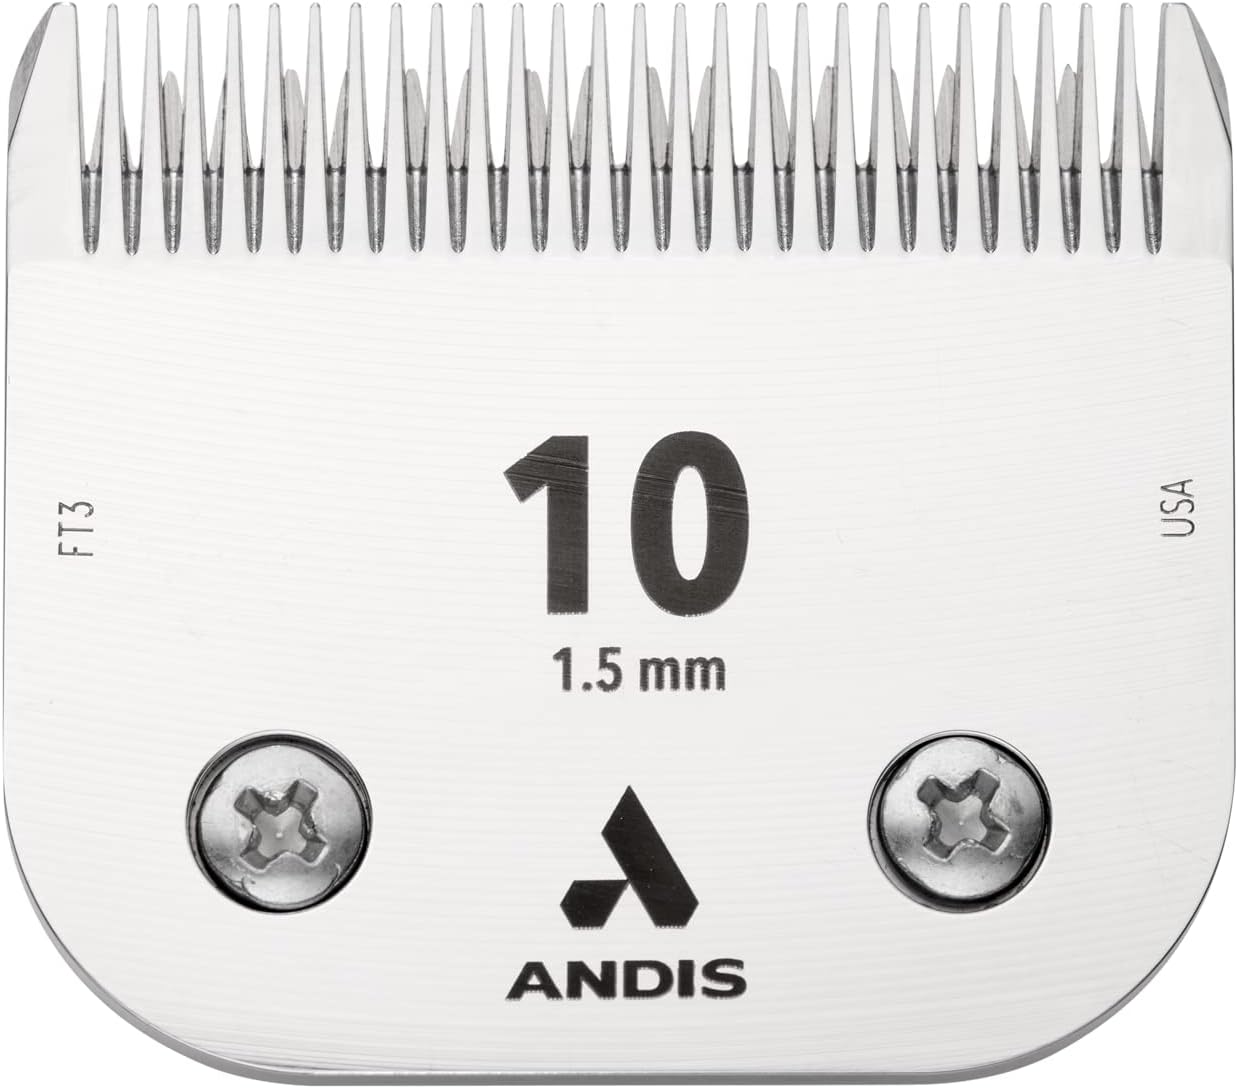 Andis – 64315, Ceramic Edge Detachable Pet Clipper Blade – Carbon-Infused Steel with Sharp Cutting Tech, Runs Cooler & Stays Sharper, Resists Rust & Heat, Size-10 - Fits AG, AGC & BDC Series, Chrome